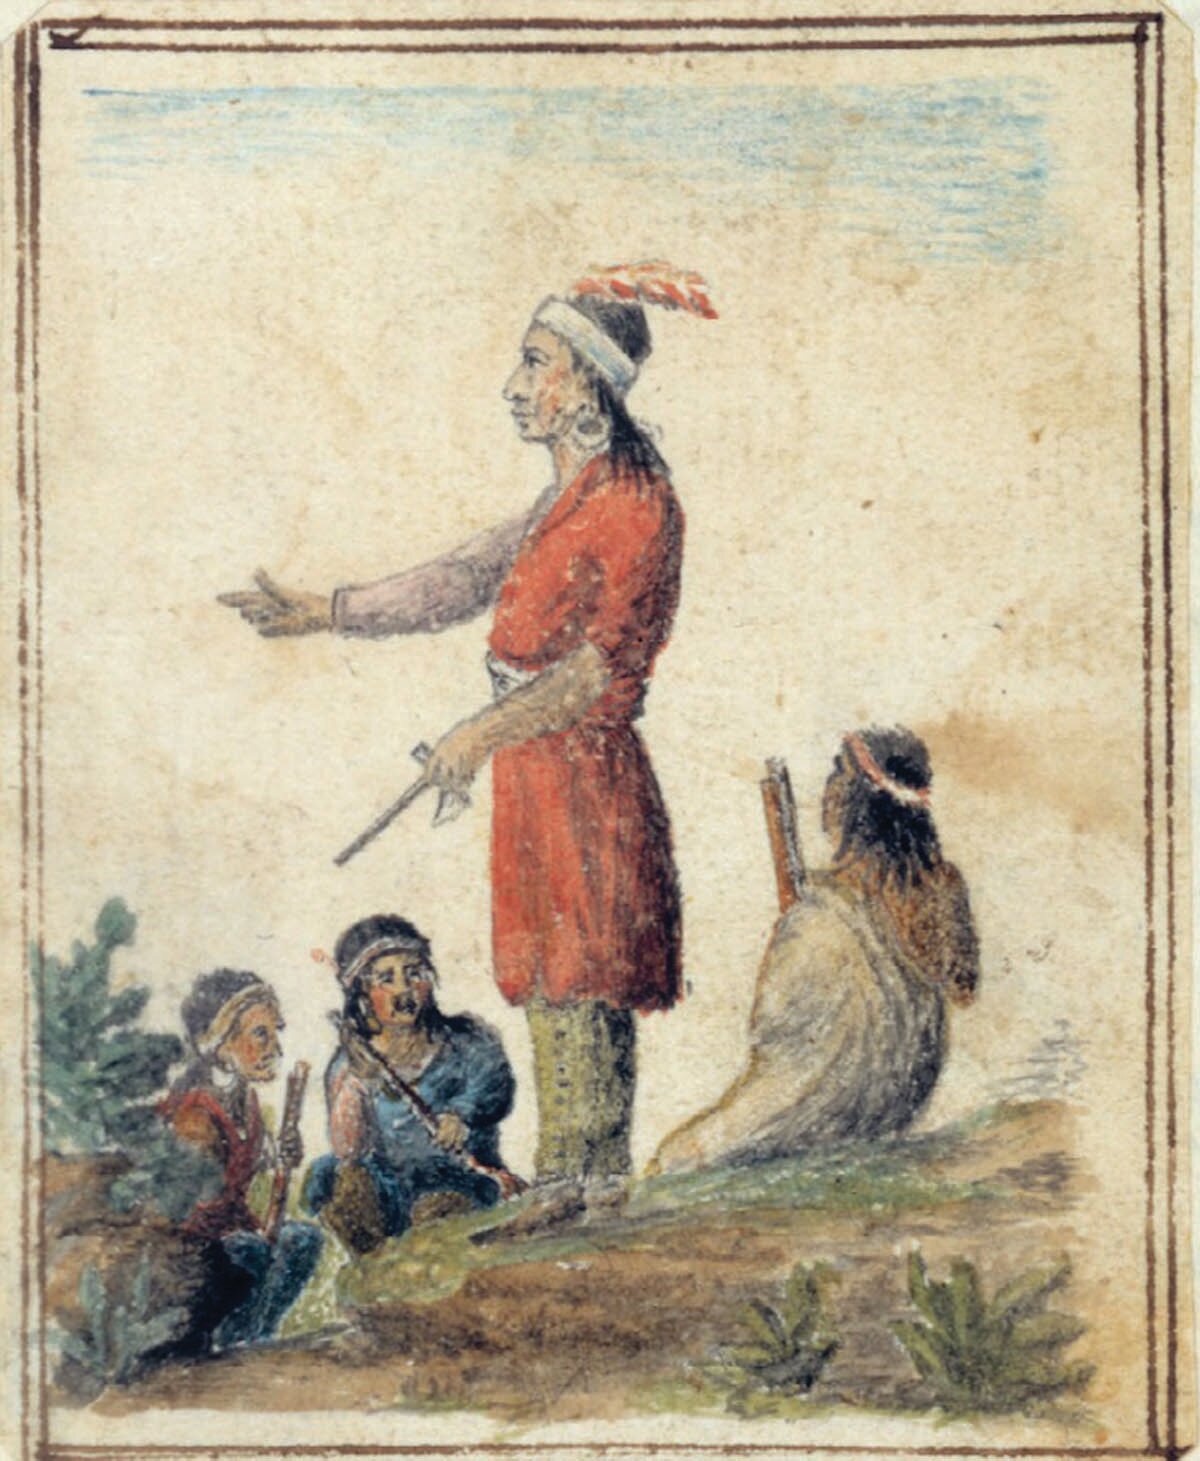 An artistic rendering of Nutimus, one of the Lenape chiefs.